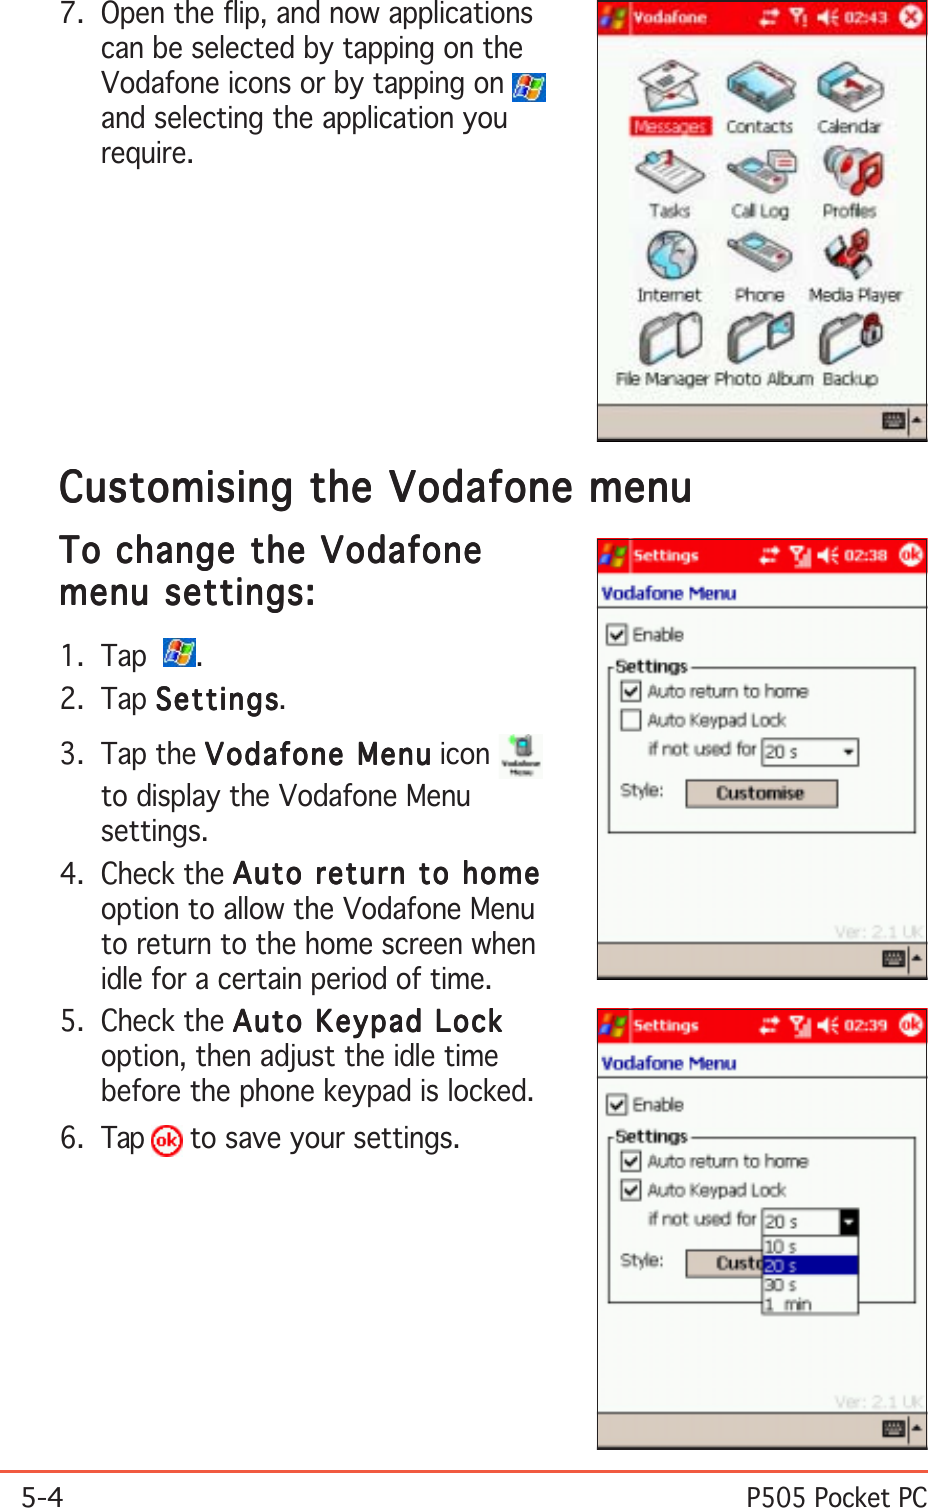 5-4P505 Pocket PCCustomising the Vodafone menuCustomising the Vodafone menuCustomising the Vodafone menuCustomising the Vodafone menuCustomising the Vodafone menuTo change the VodafoneTo change the VodafoneTo change the VodafoneTo change the VodafoneTo change the Vodafonemenu settings:menu settings:menu settings:menu settings:menu settings:1. Tap   .2. Tap SettingsSettingsSettingsSettingsSettings.3. Tap the Vodafone MenuVodafone MenuVodafone MenuVodafone MenuVodafone Menu iconto display the Vodafone Menusettings.4. Check the Auto return to homeAuto return to homeAuto return to homeAuto return to homeAuto return to homeoption to allow the Vodafone Menuto return to the home screen whenidle for a certain period of time.5. Check the Auto Keypad LockAuto Keypad LockAuto Keypad LockAuto Keypad LockAuto Keypad Lockoption, then adjust the idle timebefore the phone keypad is locked.6. Tap   to save your settings.7. Open the flip, and now applicationscan be selected by tapping on theVodafone icons or by tapping on and selecting the application yourequire.